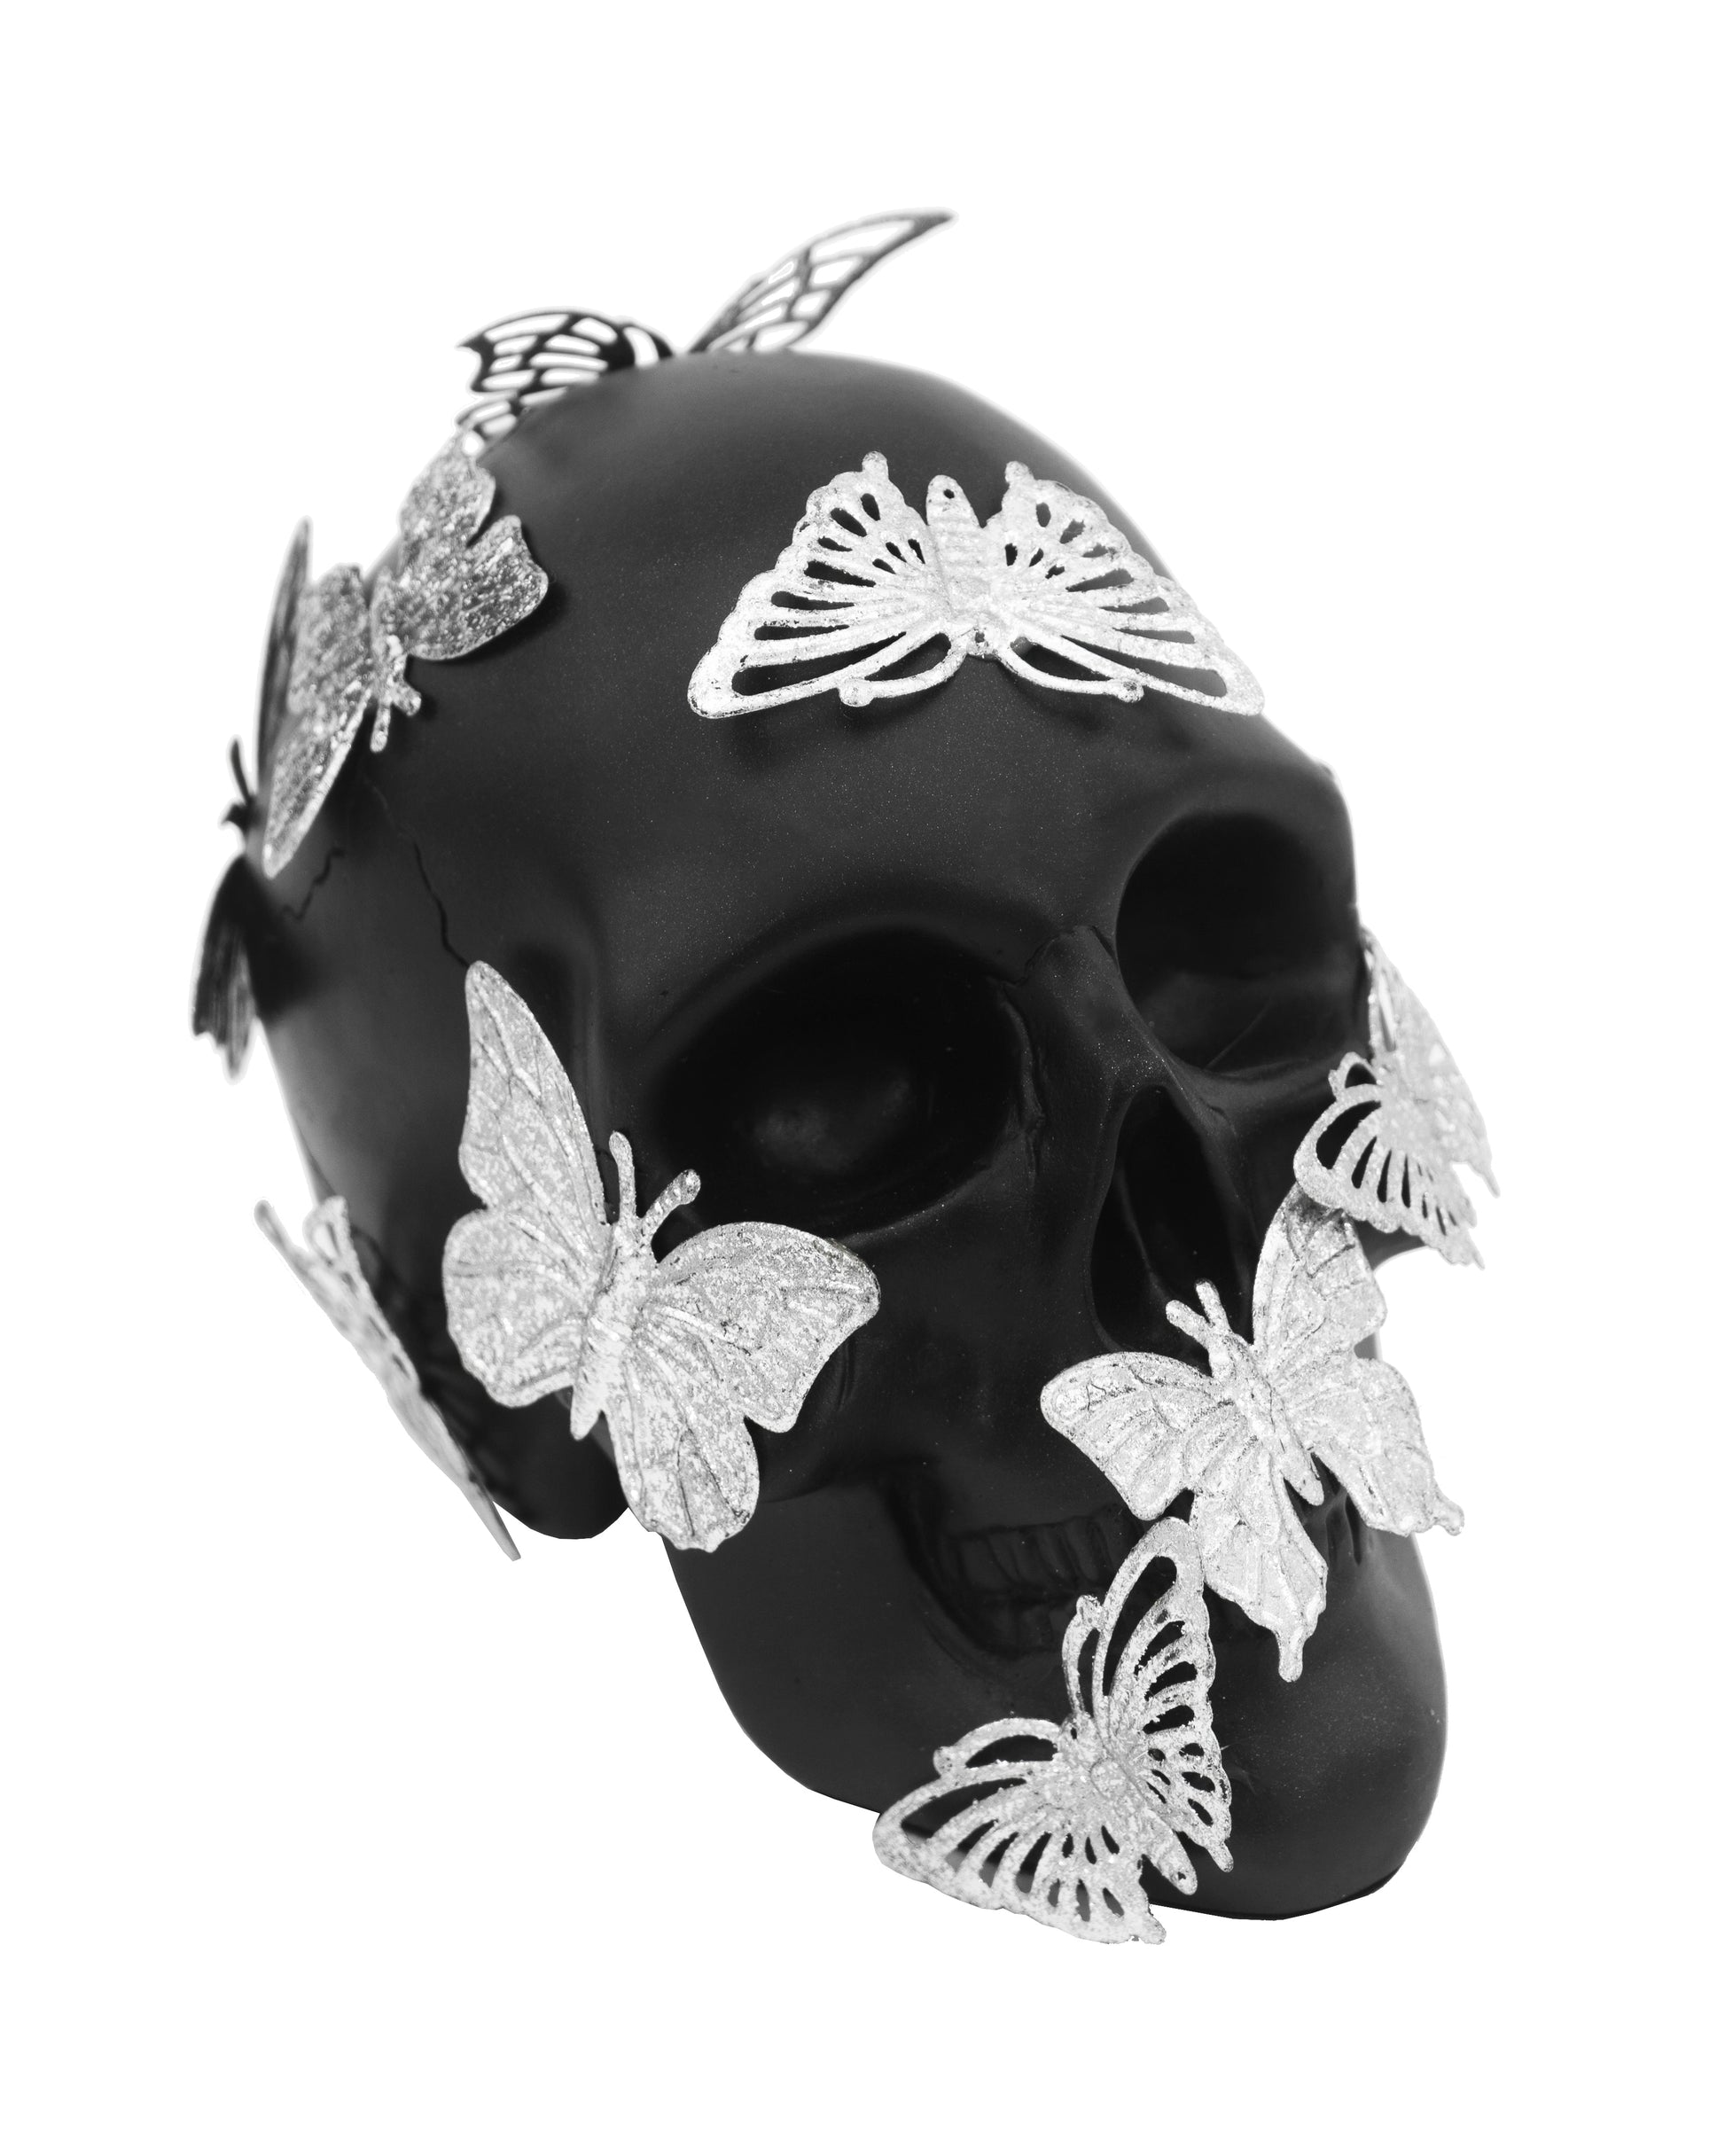 Black Skull W/Accent Butterflies - Expo Home Decor